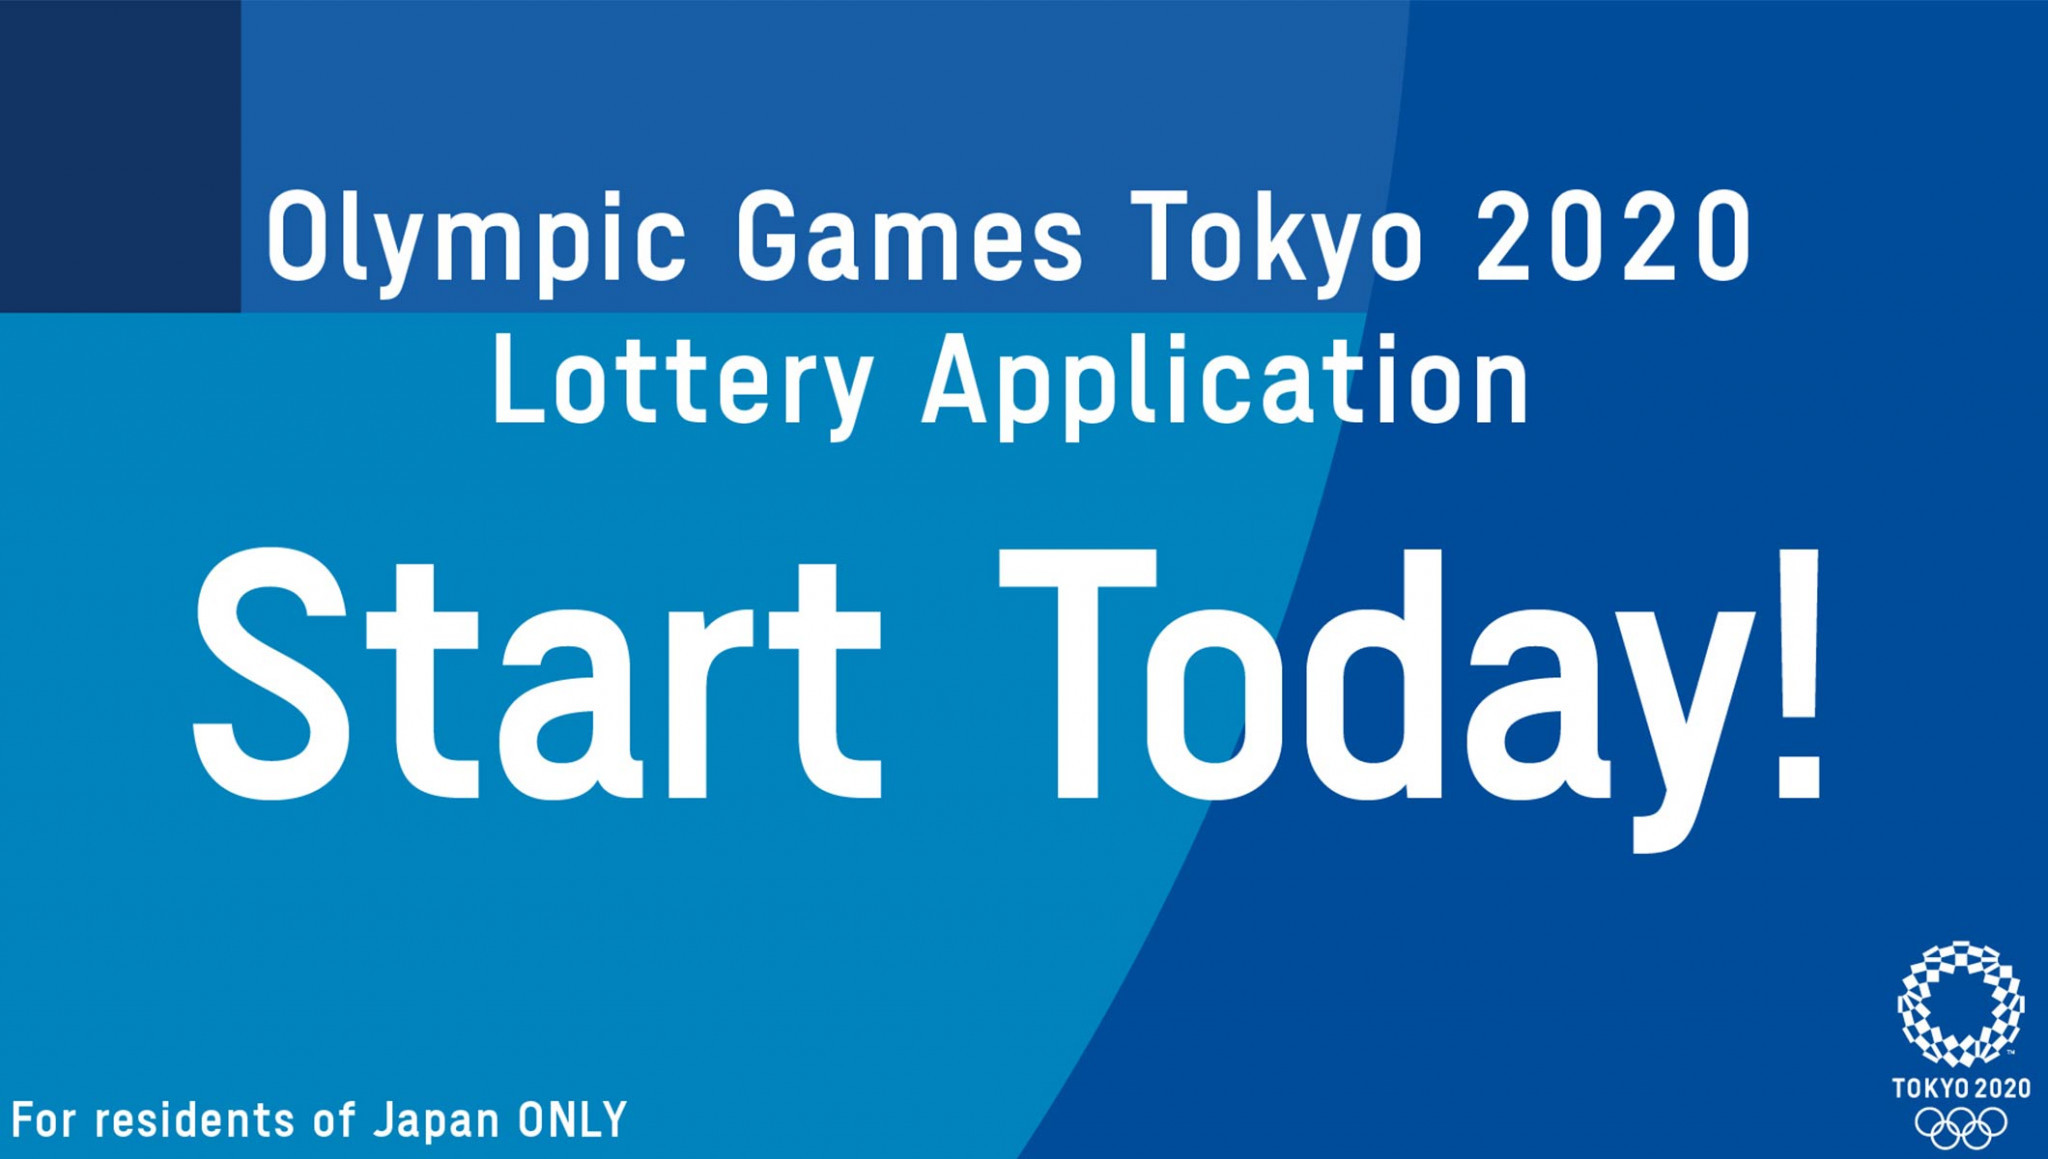 Tokyo 2020 has today launched the lottery for the first phase of Olympic Games ticket sales for residents of Japan ©Tokyo 2020